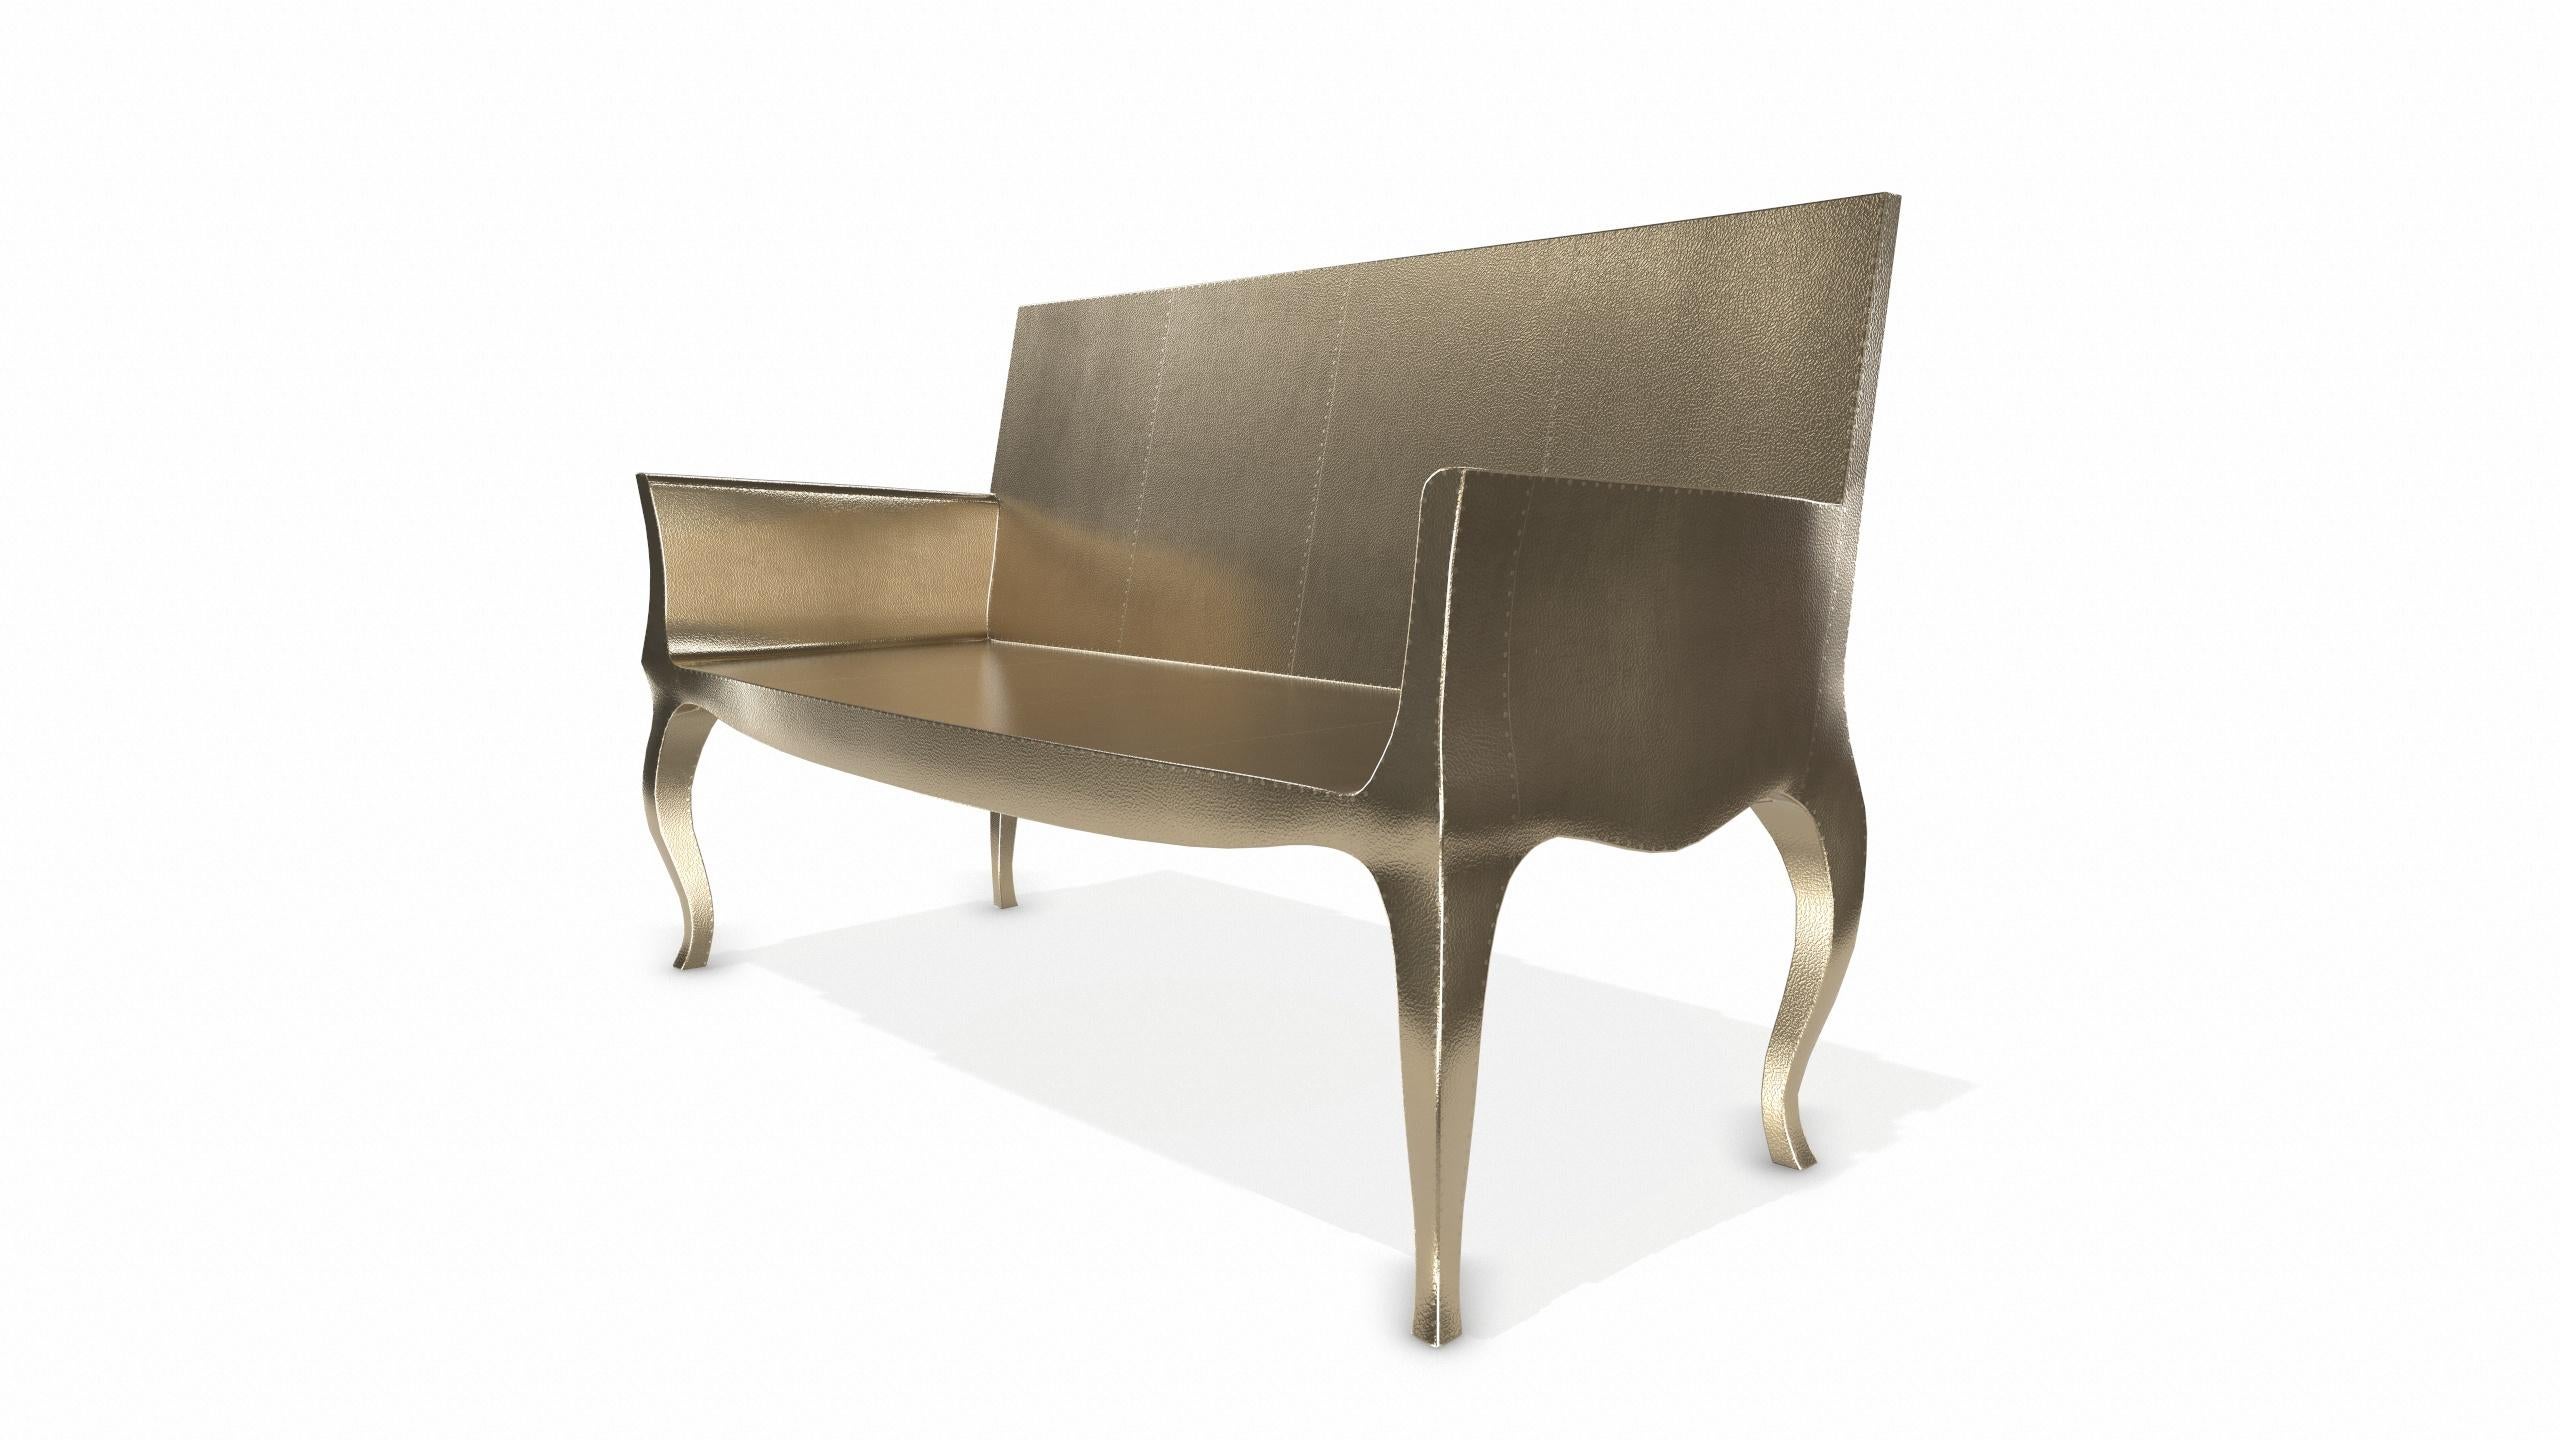 Contemporary Louise Settee Art Deco Benches in Fine Hammered Brass by Paul Mathieu For Sale